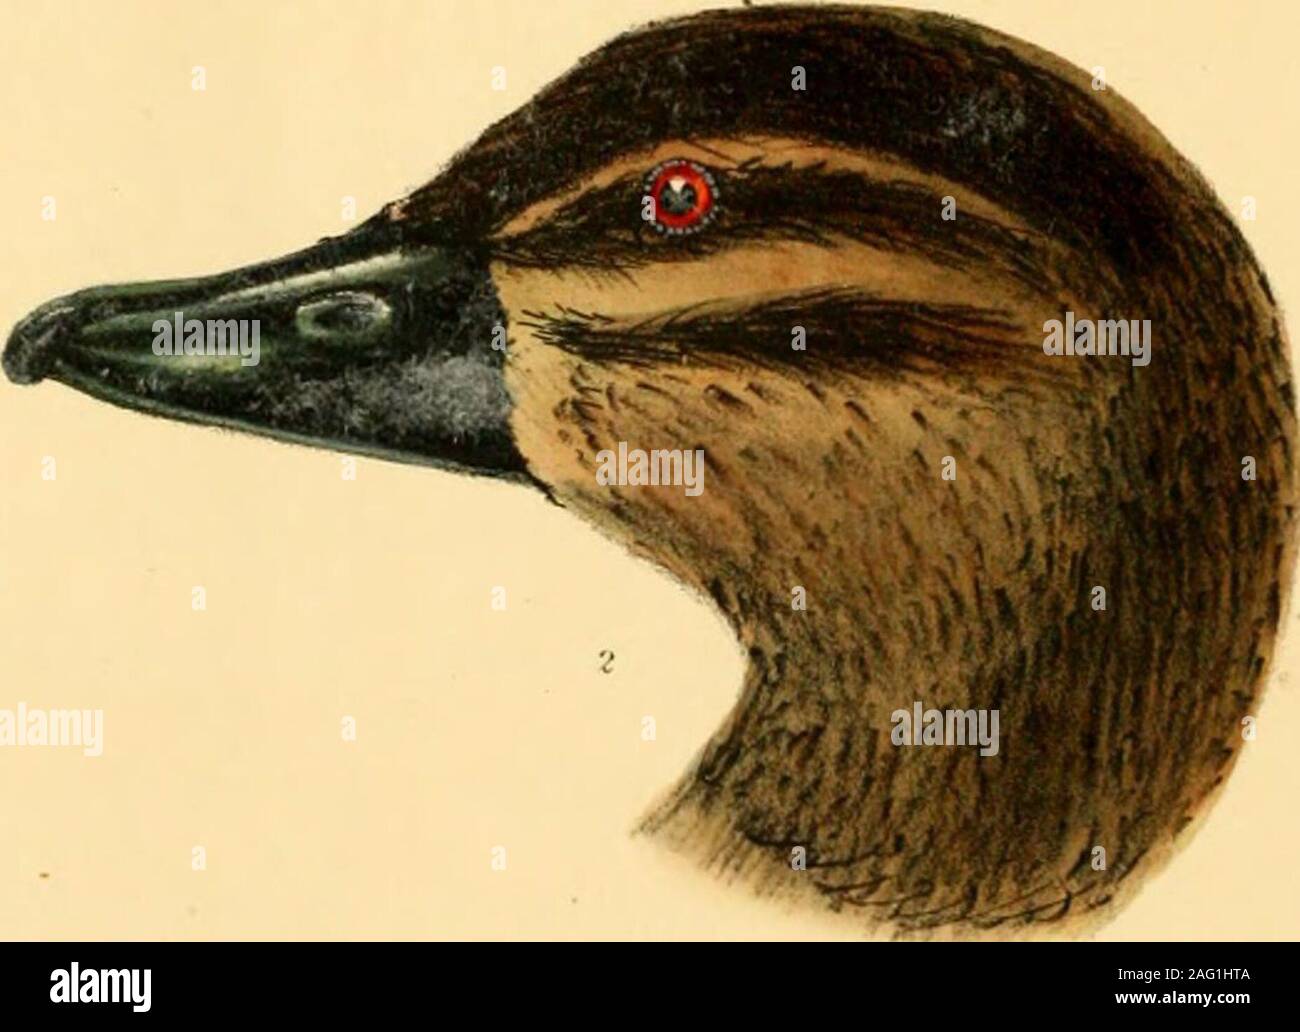 . A monograph on the anatidae, or duck tribe. ./... Kteko Domwuca fern ... 169 Male : crown and upper part of the back of the neck black, occasionally speckled with whitish;back, lower part of the neck, flanks, rump, and under tail coverts deep glossy black, each feathertransversely streaked with one or two narrow lines of white or light brown; wings and tail sootyblack; remainder grey or silvery white ; bill and legs lead coloured, the former with a large com-pressed caruncle on the lower mandible. Fern.: smaller than the male, but in colouring similar; without the caruncle. Biziura Nova Boll Stock Photo